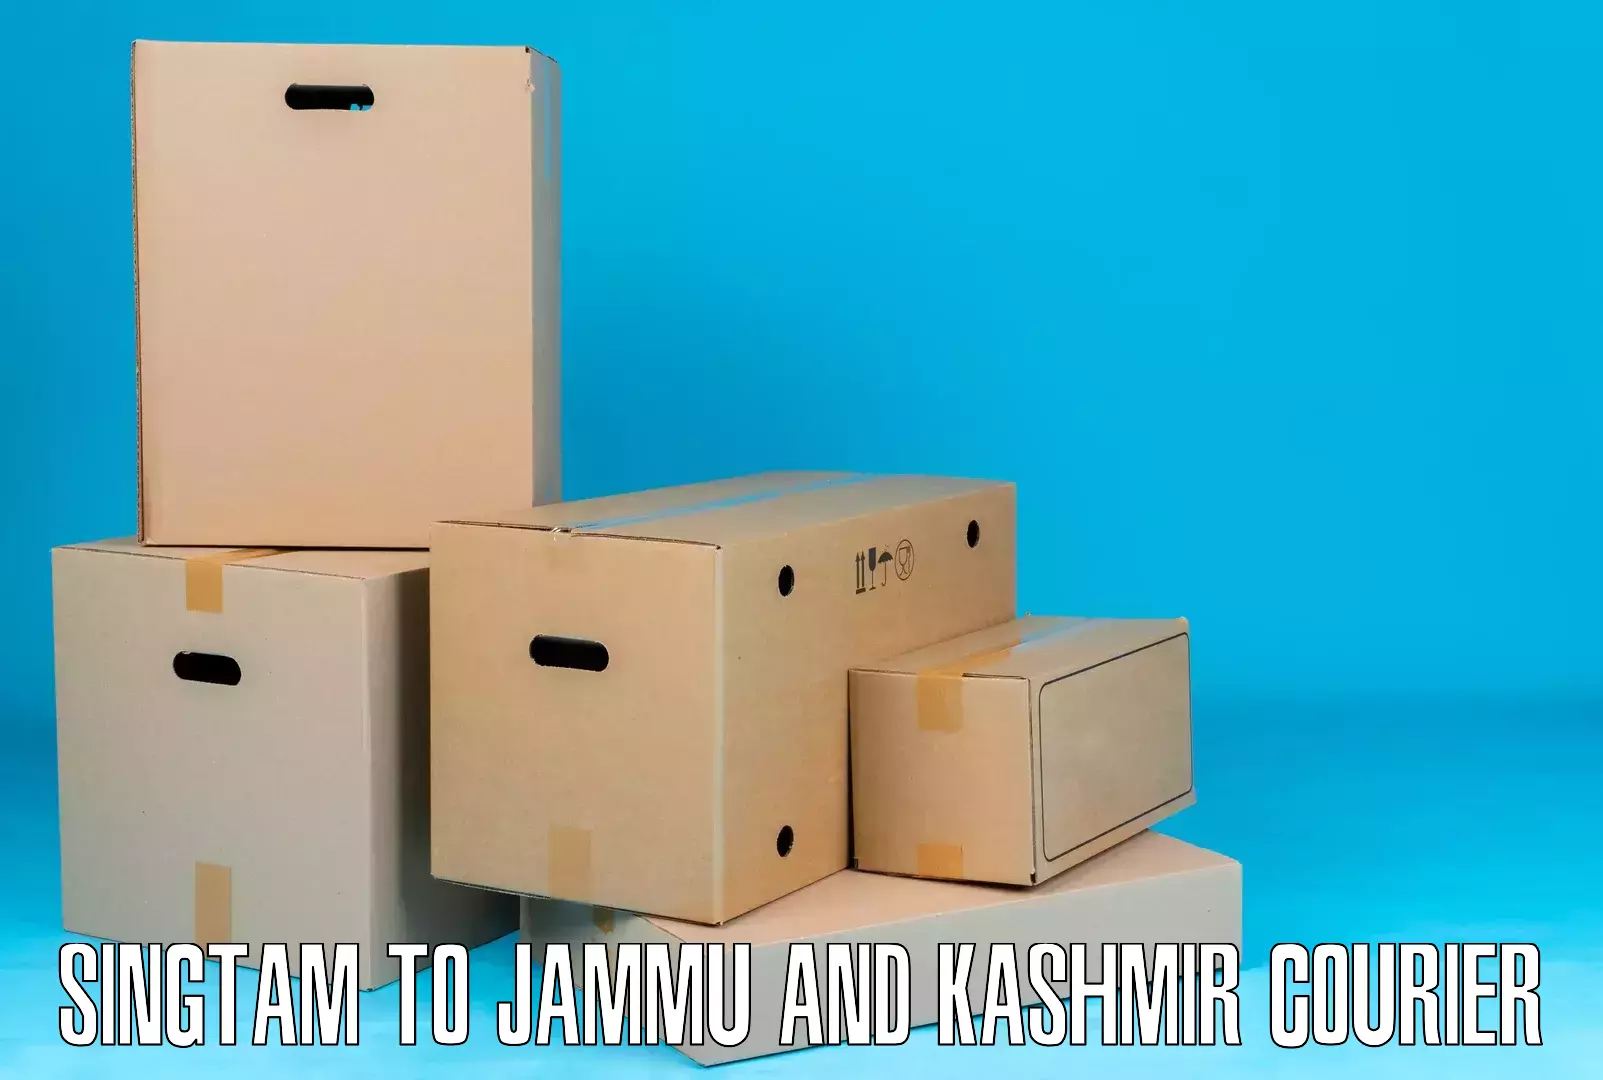 Business delivery service Singtam to Jammu and Kashmir